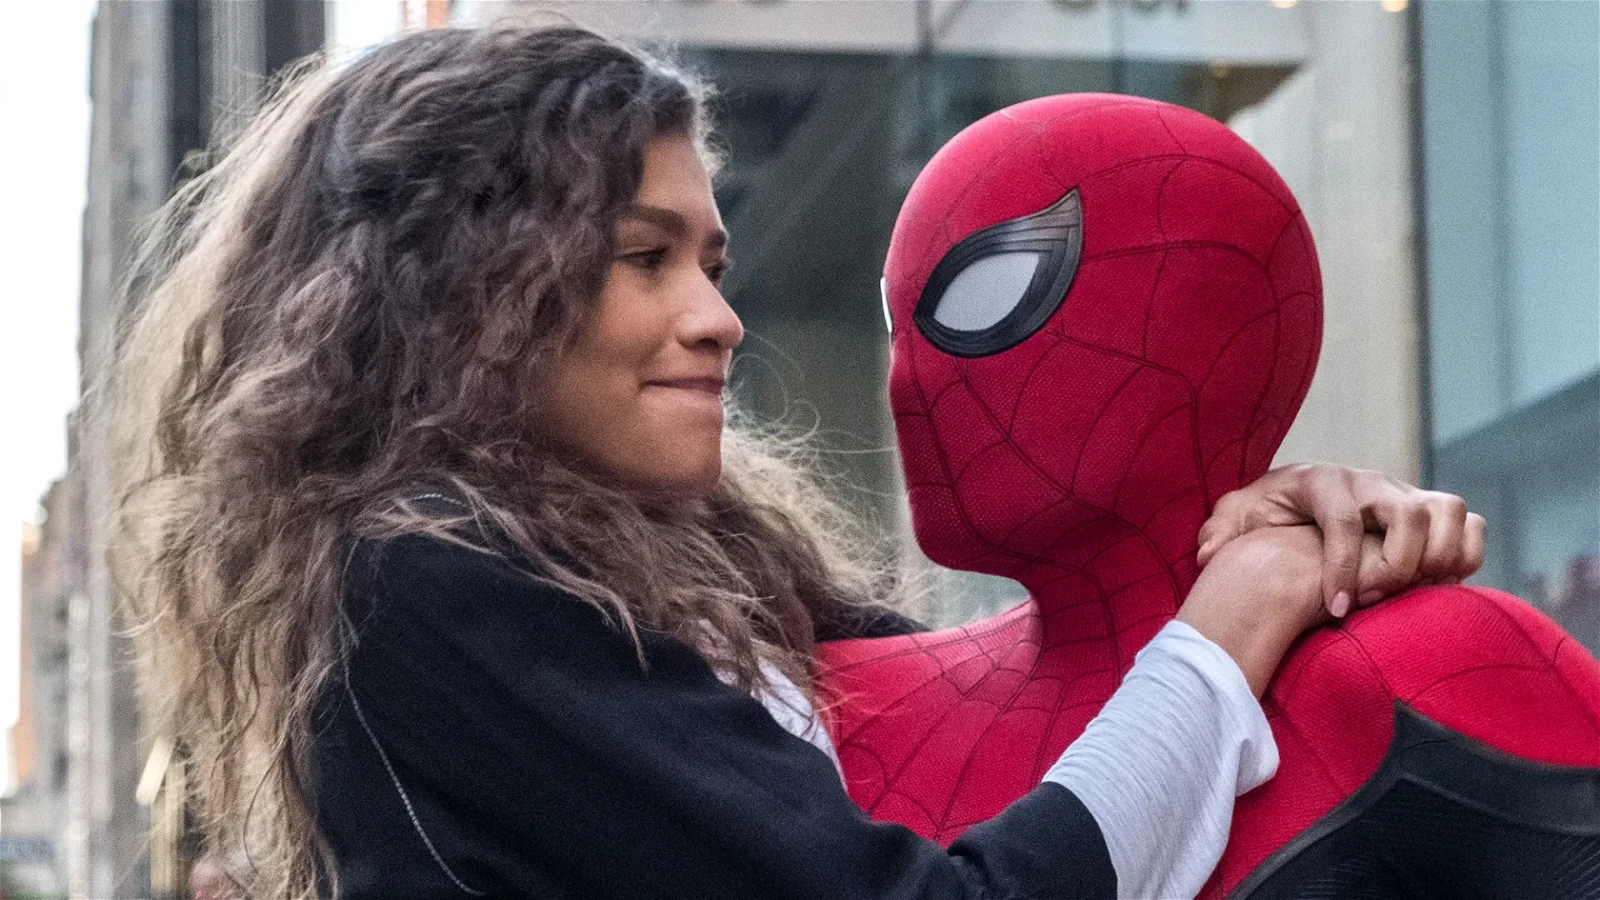 Zendaya and Tom Holland fell in love on the sets of Spider-Man